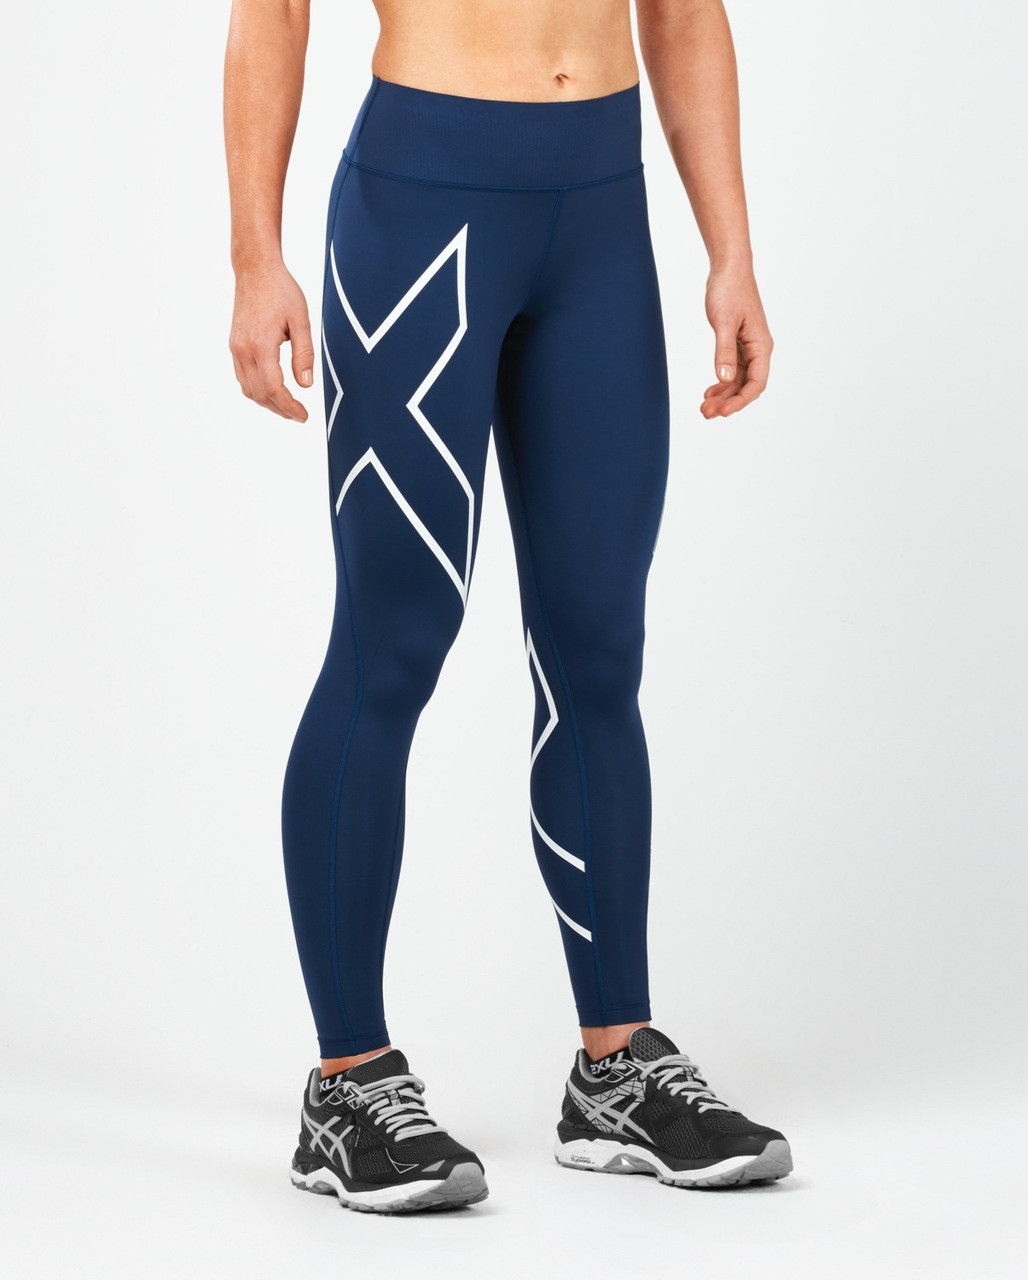 How to wear 2XU compression tights - Quora